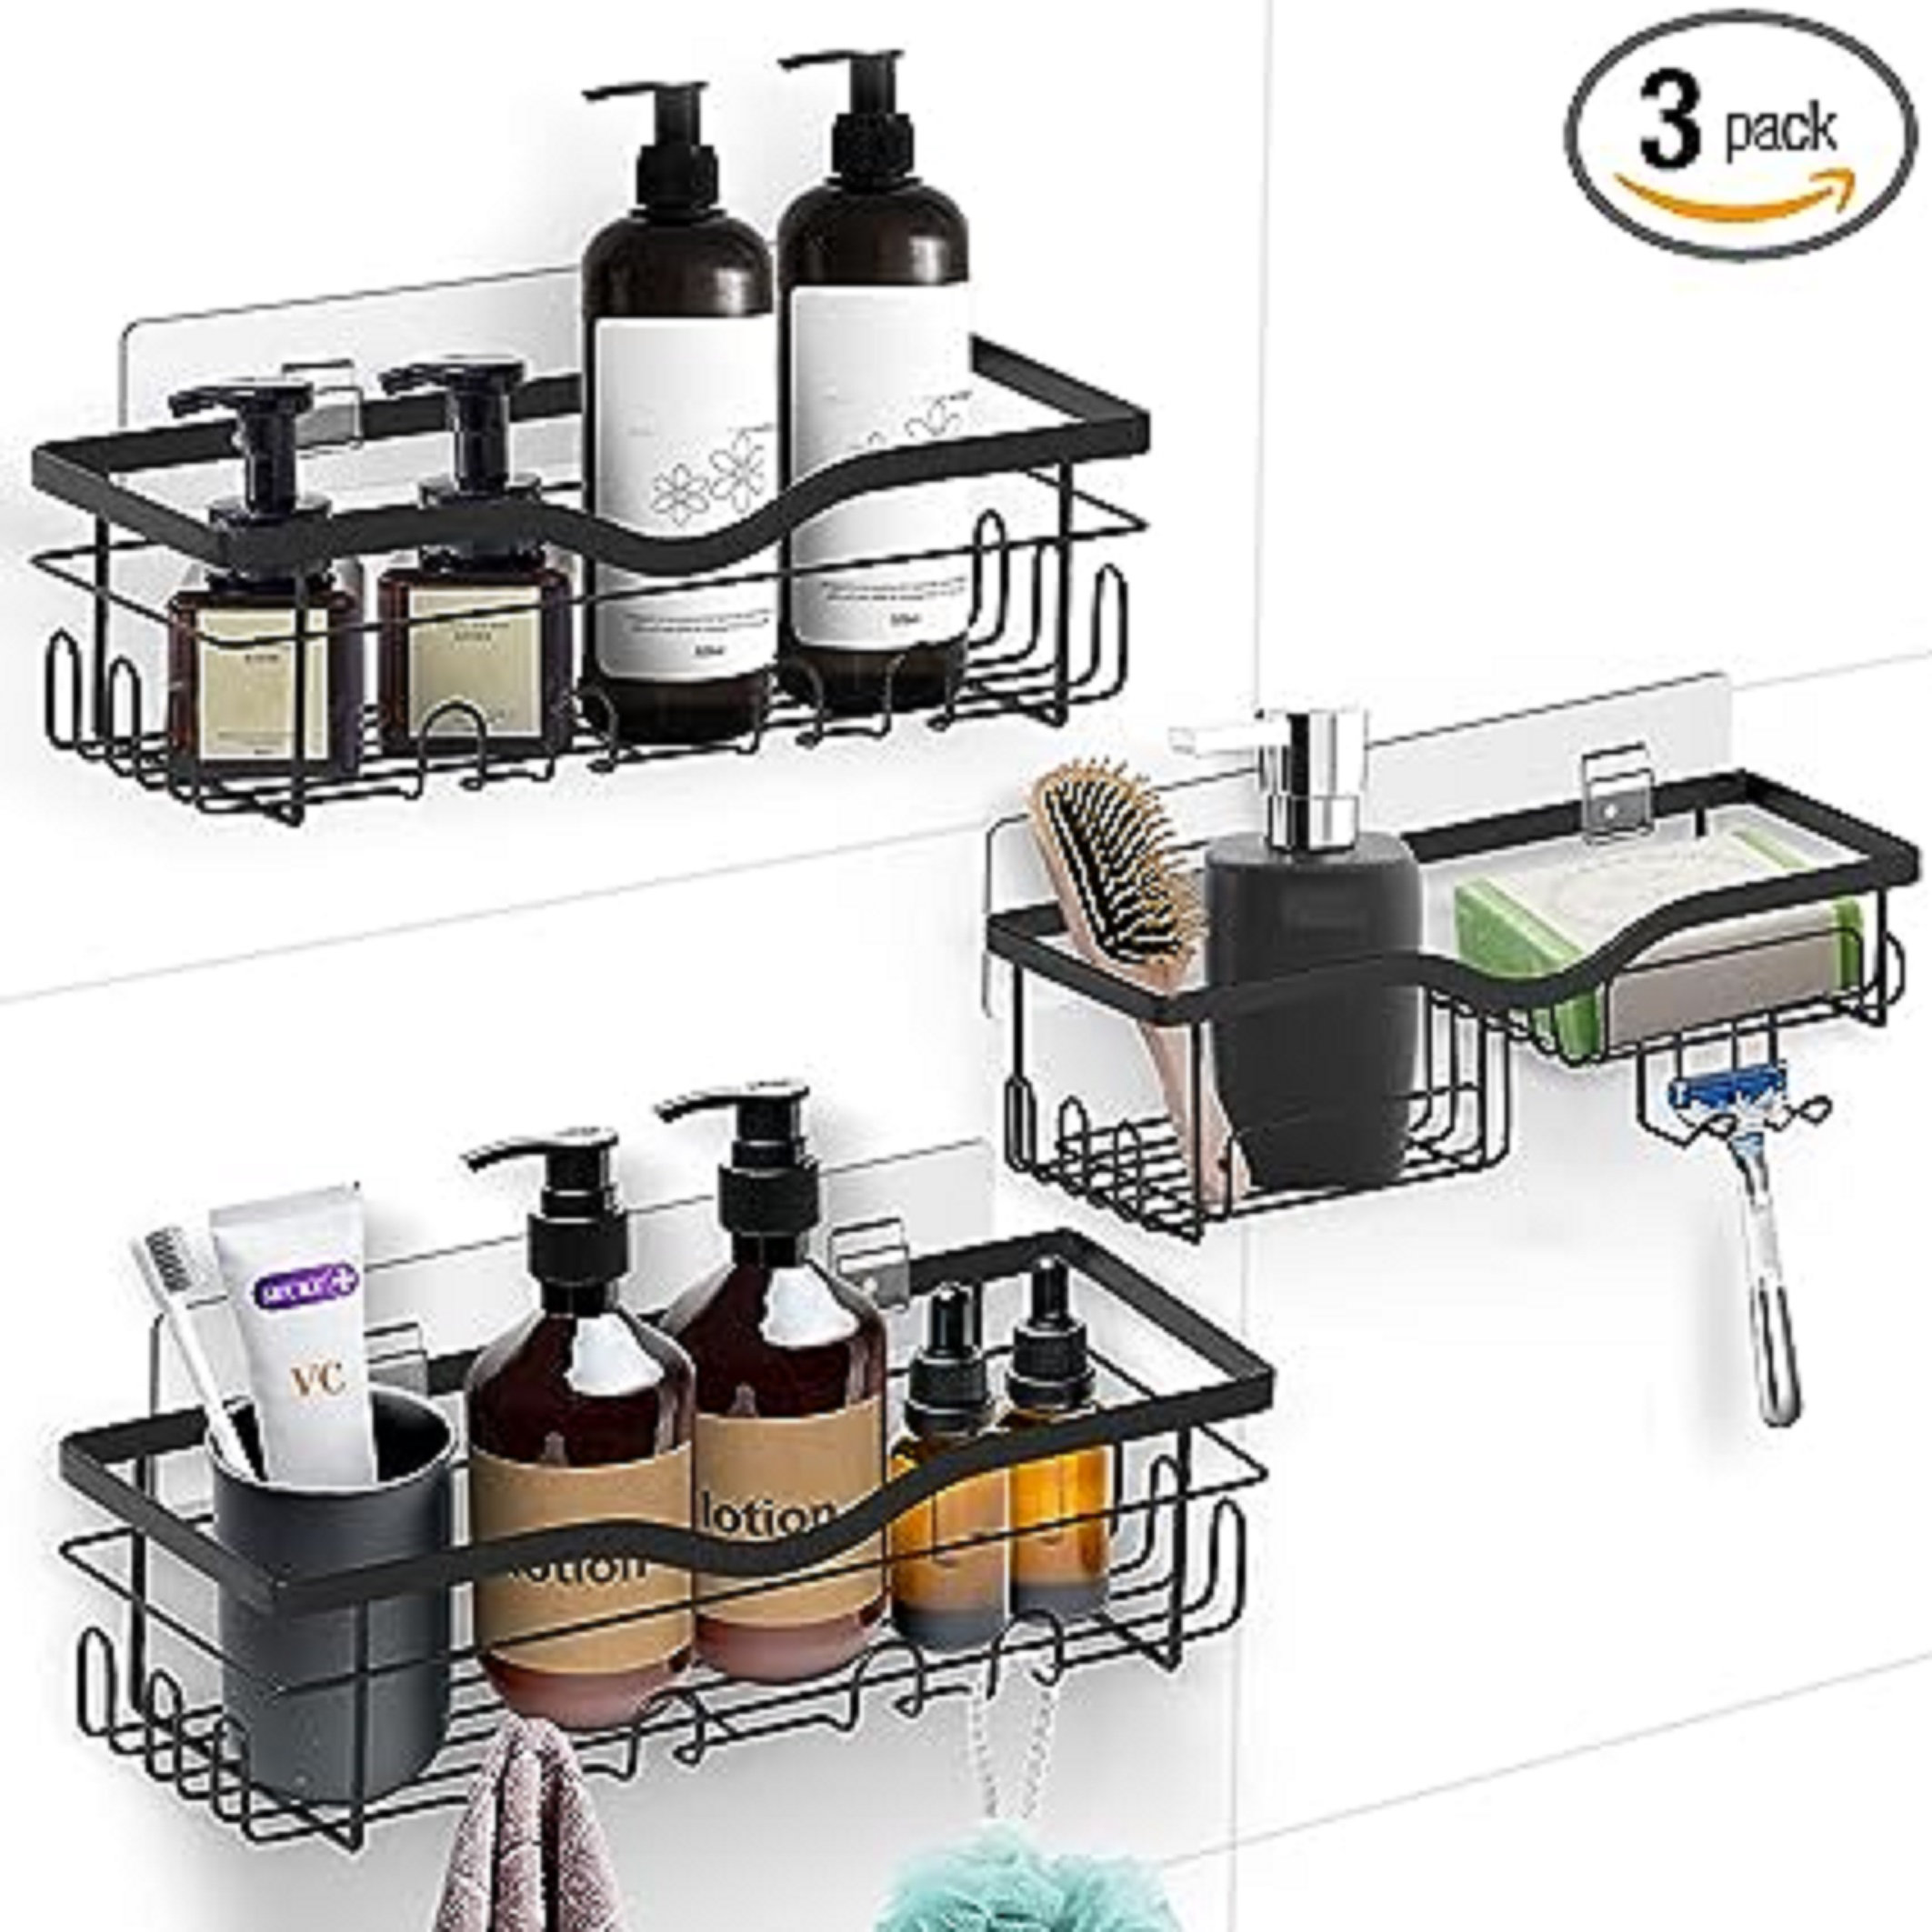 Mansuur Free-Standing Stainless Steel Shower Caddy Rebrilliant